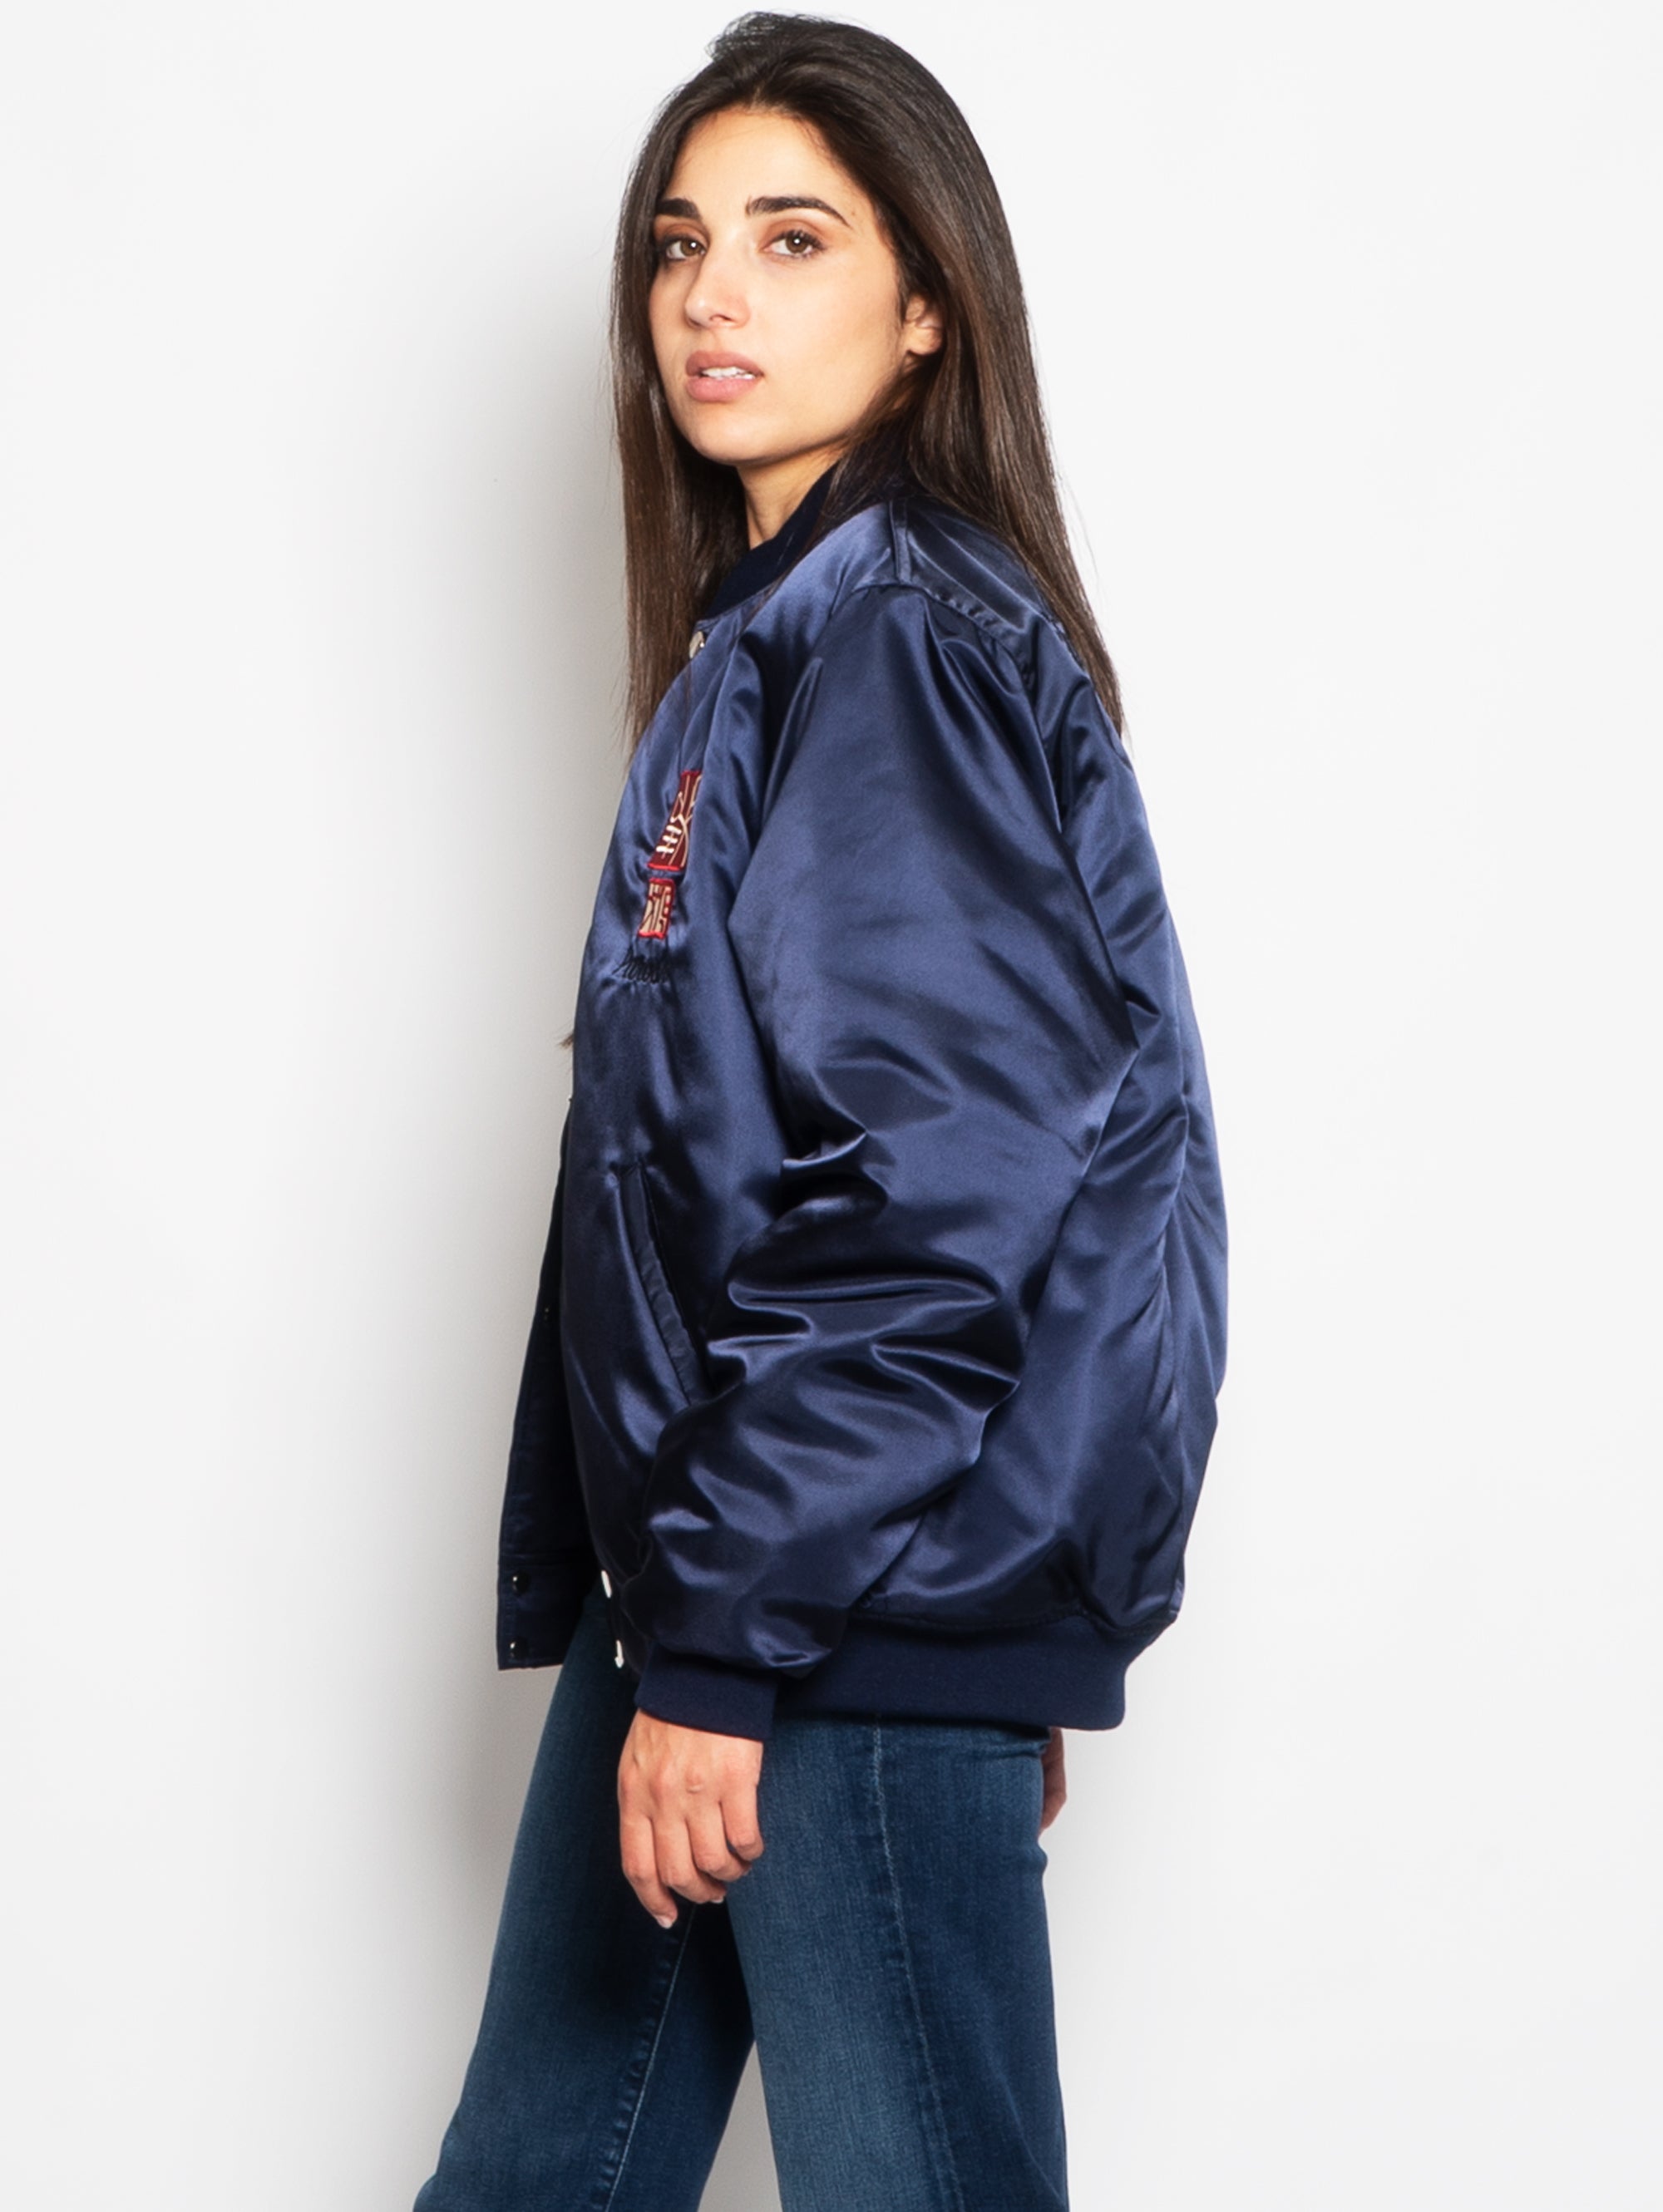 Tiger Embroidered Bomber Jacket in Blue Acetate